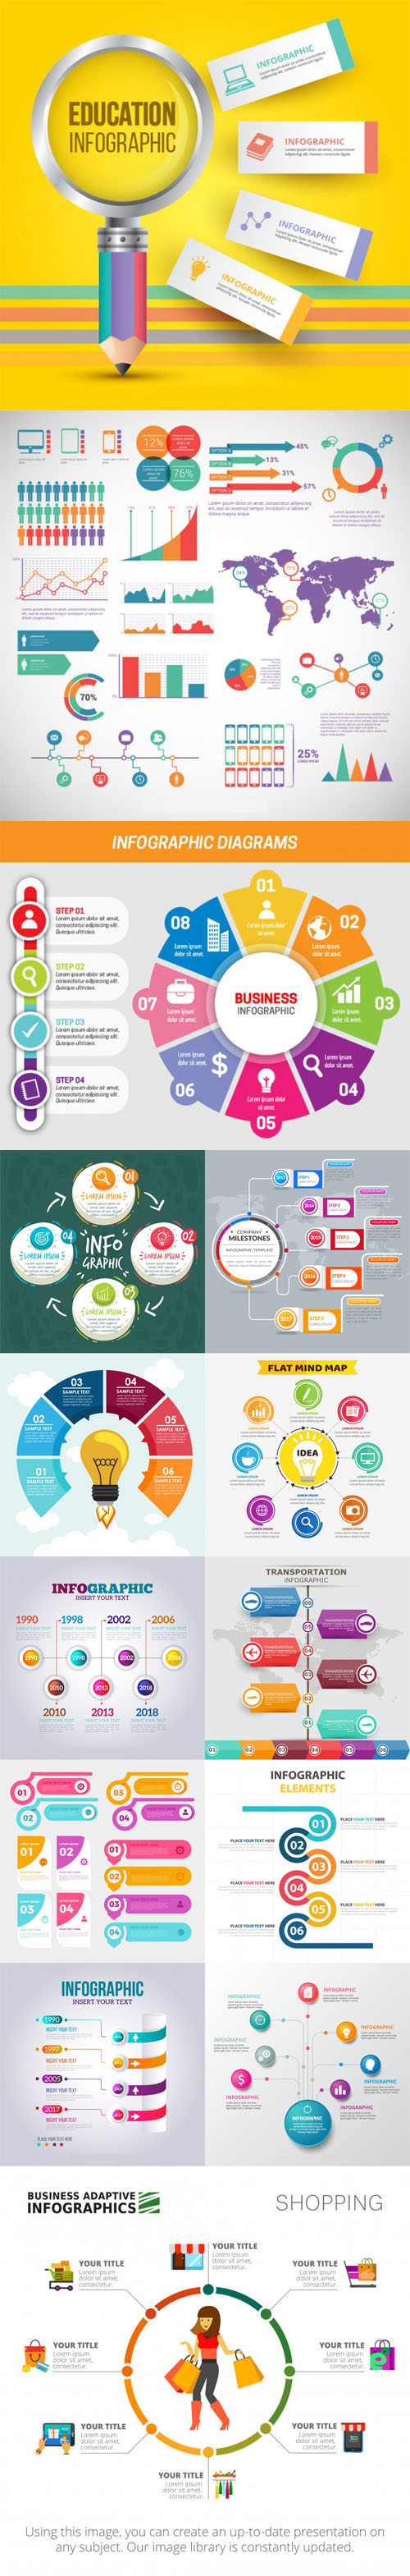 14 Infographic Templates Pack Design Vector